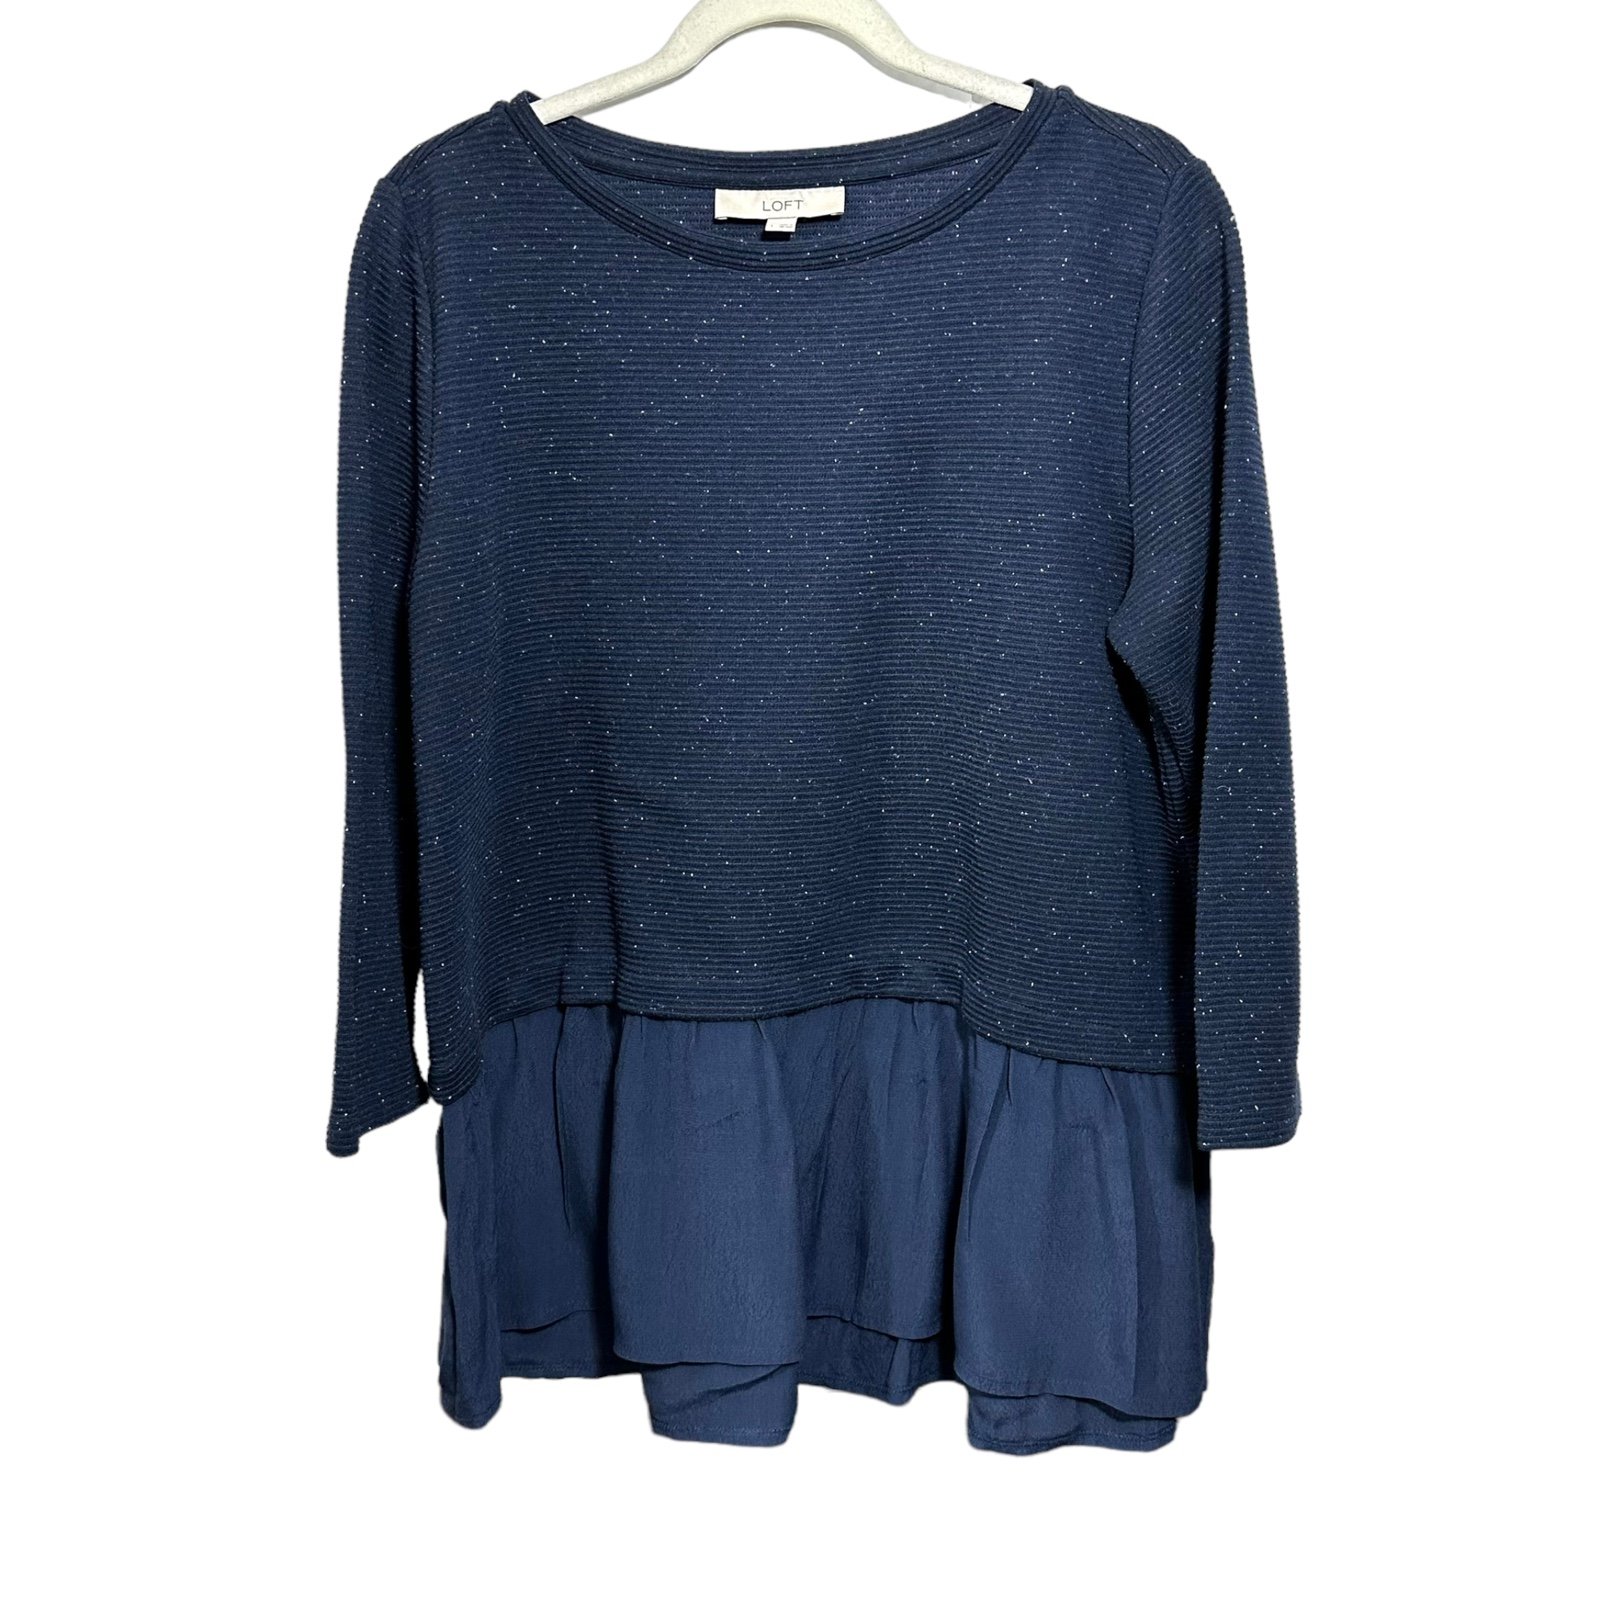 big discount Ann Taylor LOFT Sz L Flecked Two In One Sweater Peplum Top Ruffle Navy Blue ftuZwPY63 Online Exclusive